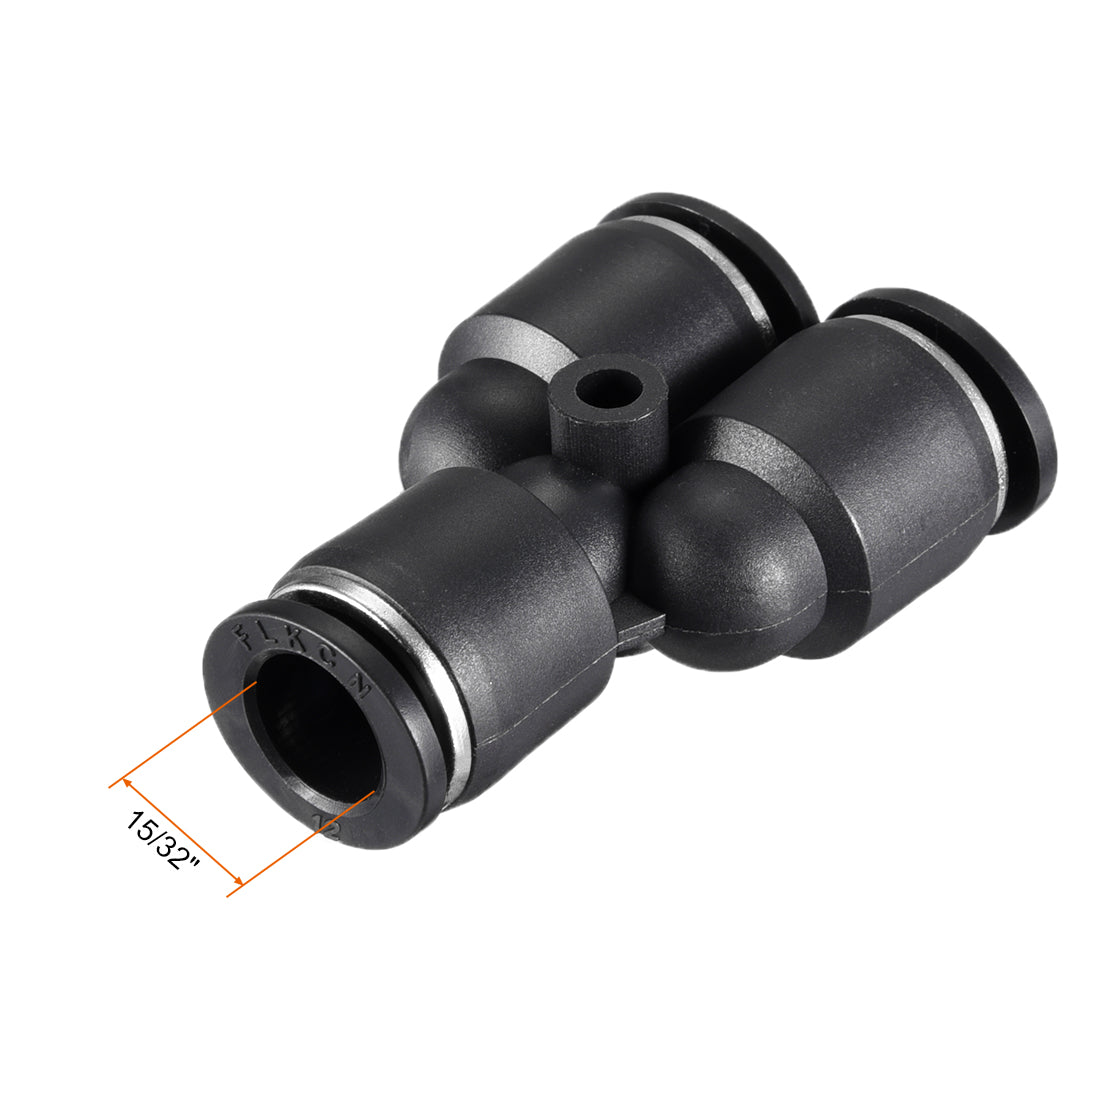 uxcell Uxcell 2pcs Push To Connect Fittings Y Type Tube Connect 12 mm or 15/32" od Push Fit Fittings Tube Fittings Push Lock Black(12mm Y tee)